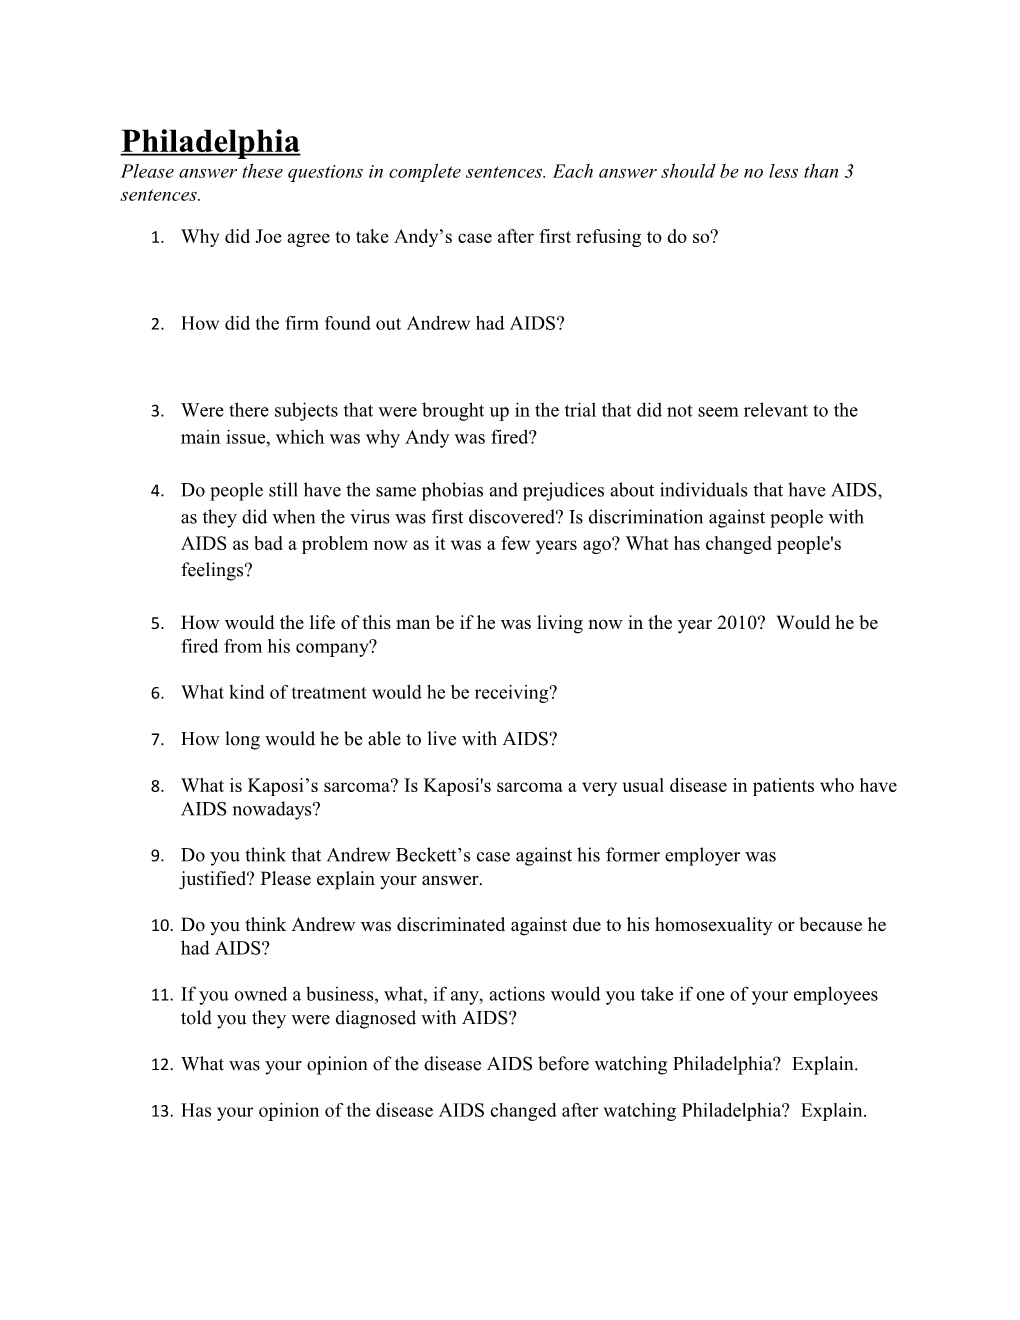 Please Answer These Questions in Complete Sentences. Each Answer Should Be No Less Than